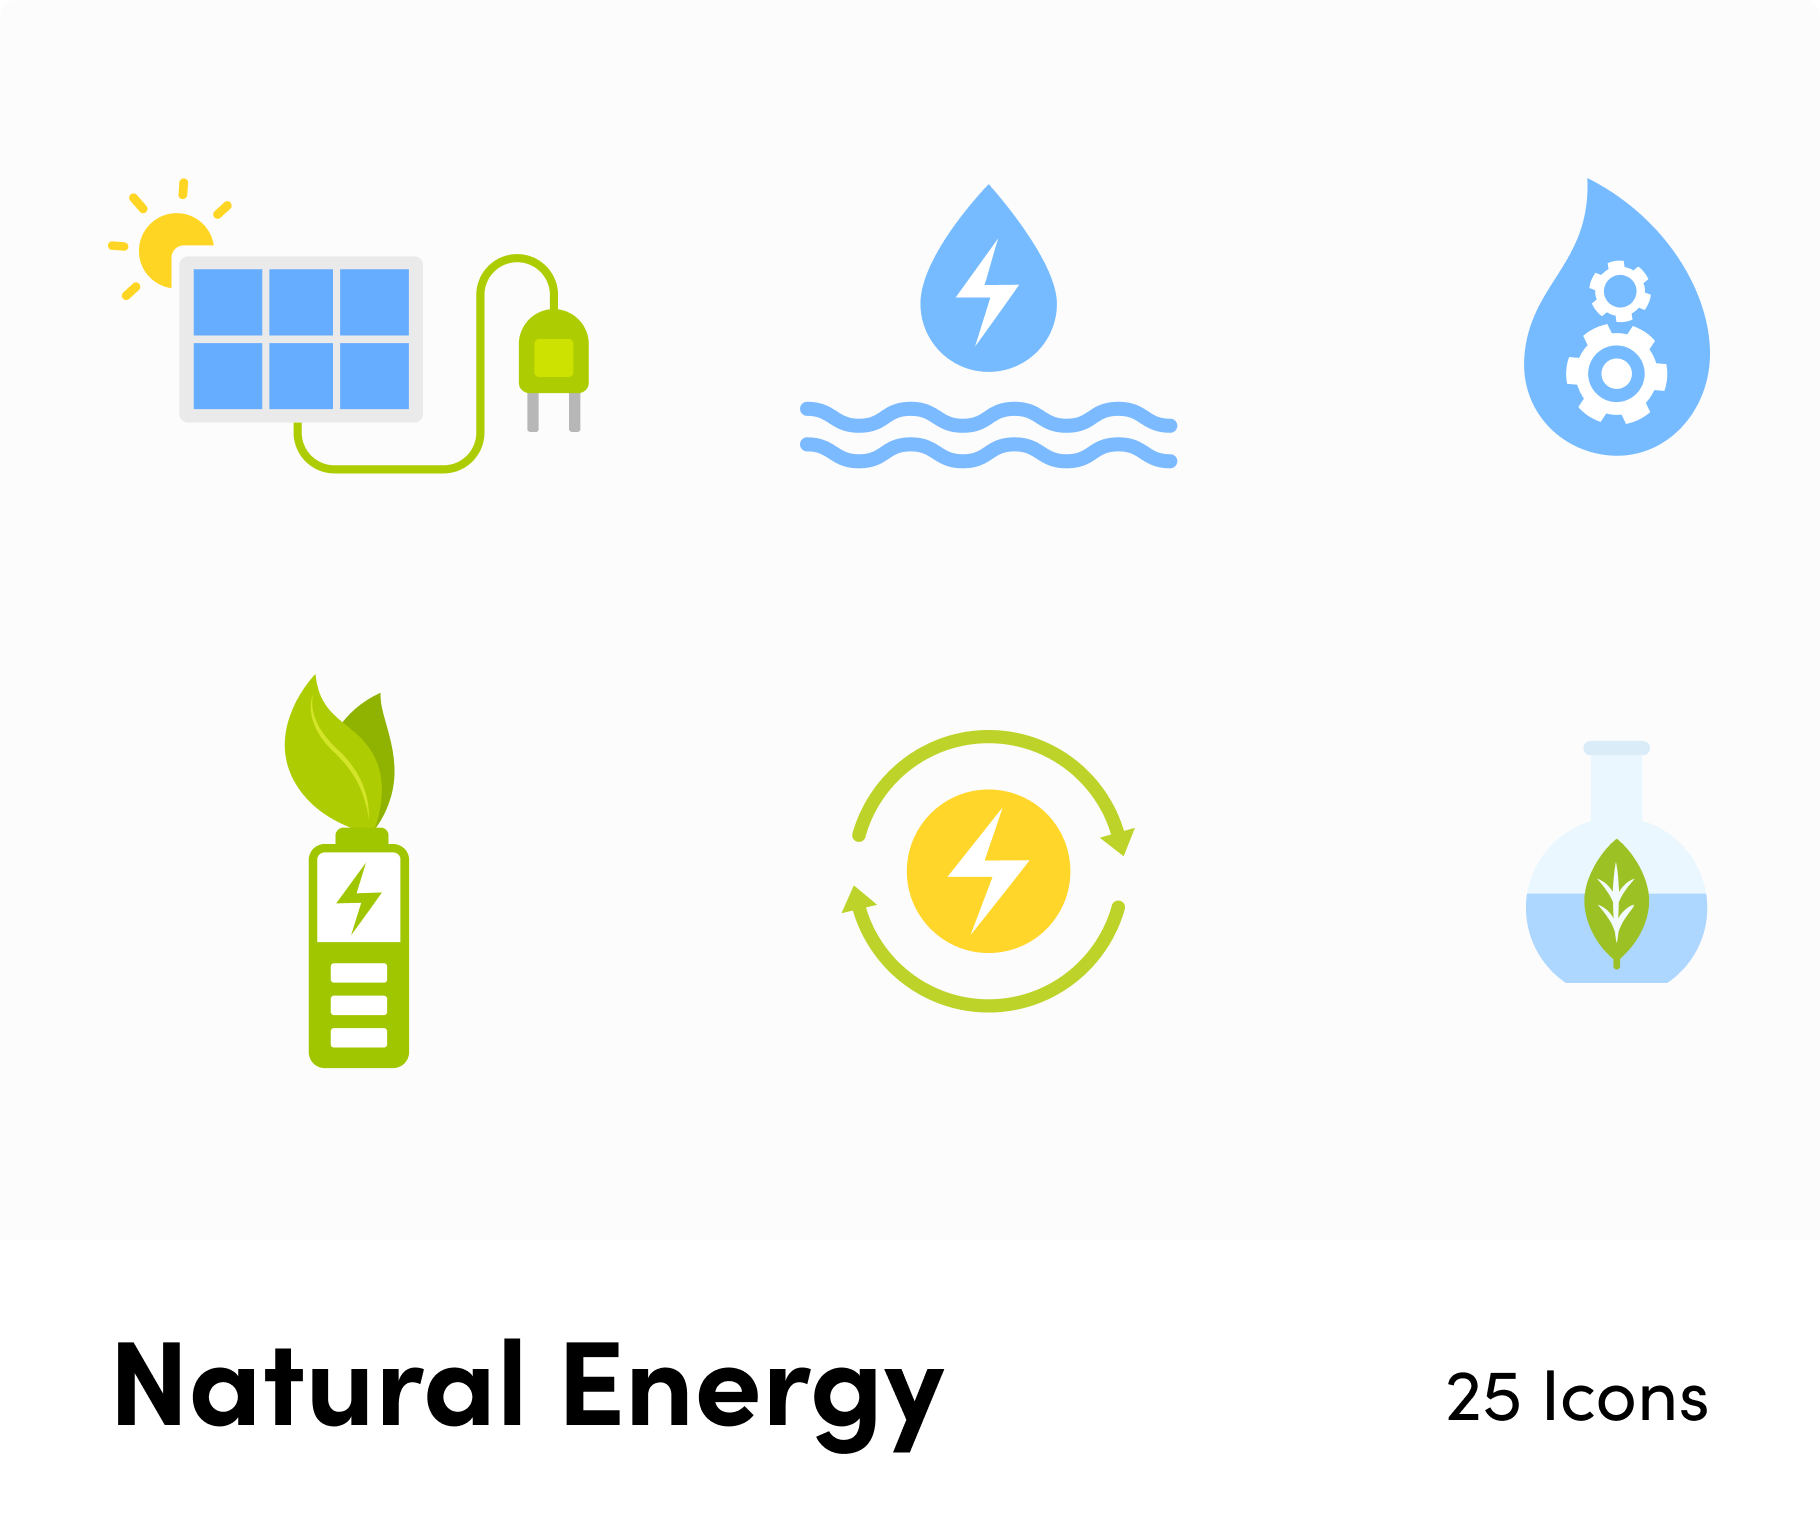 Natural Energy-Flat-Vector-Icons Icons Natural Energy Flat Vector Icons S12092104 powerpoint-template keynote-template google-slides-template infographic-template